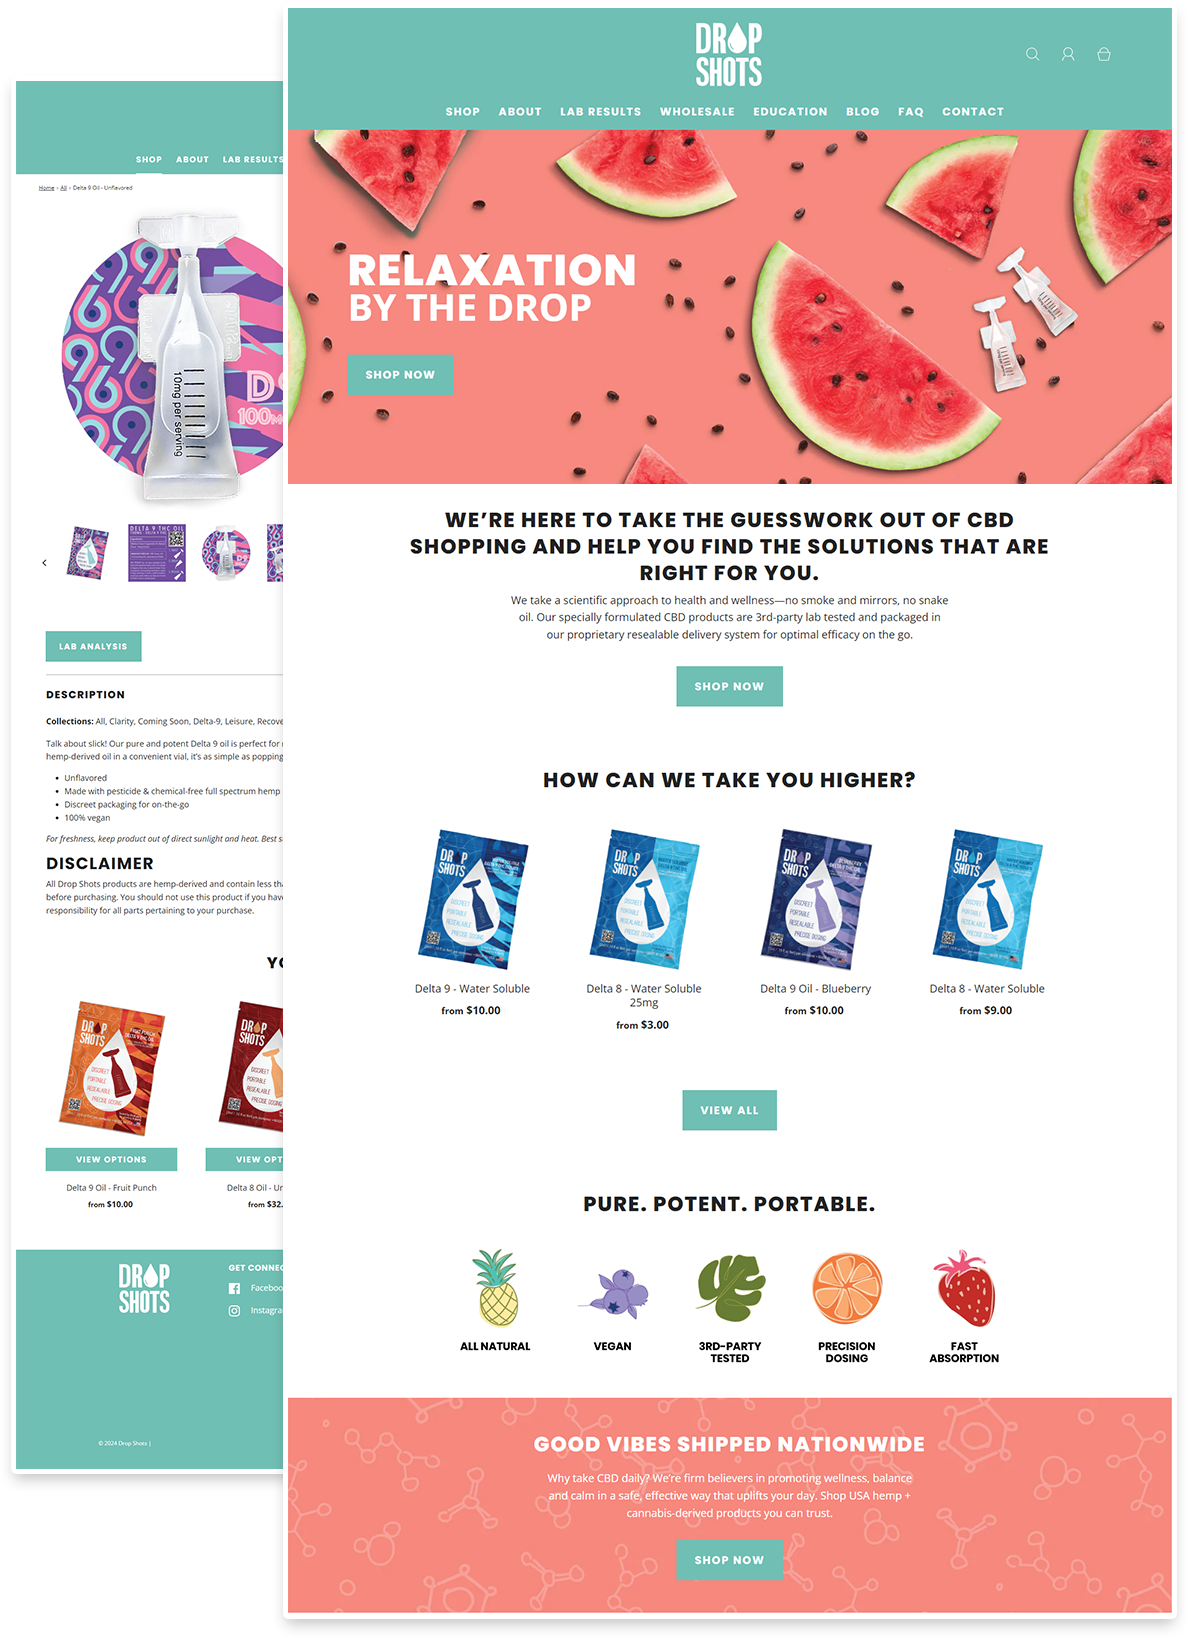 Screenshot of Dropshots e-commerce website homepage featuring a banner with the tagline "Relaxation by the Drop" against a backdrop of watermelon slices and dropper bottles. Below the banner, the site displays various CBD product categories, a promotional section titled "How Can We Take You Higher?" with product thumbnails for Delta 9 water-soluble products, and icons highlighting the benefits such as 'All Natural,' 'Vegan,' and '3rd-Party Tested.' Additional sections promote the brand's ethos and nationwide shipping, with an emphasis on wellness and trust.